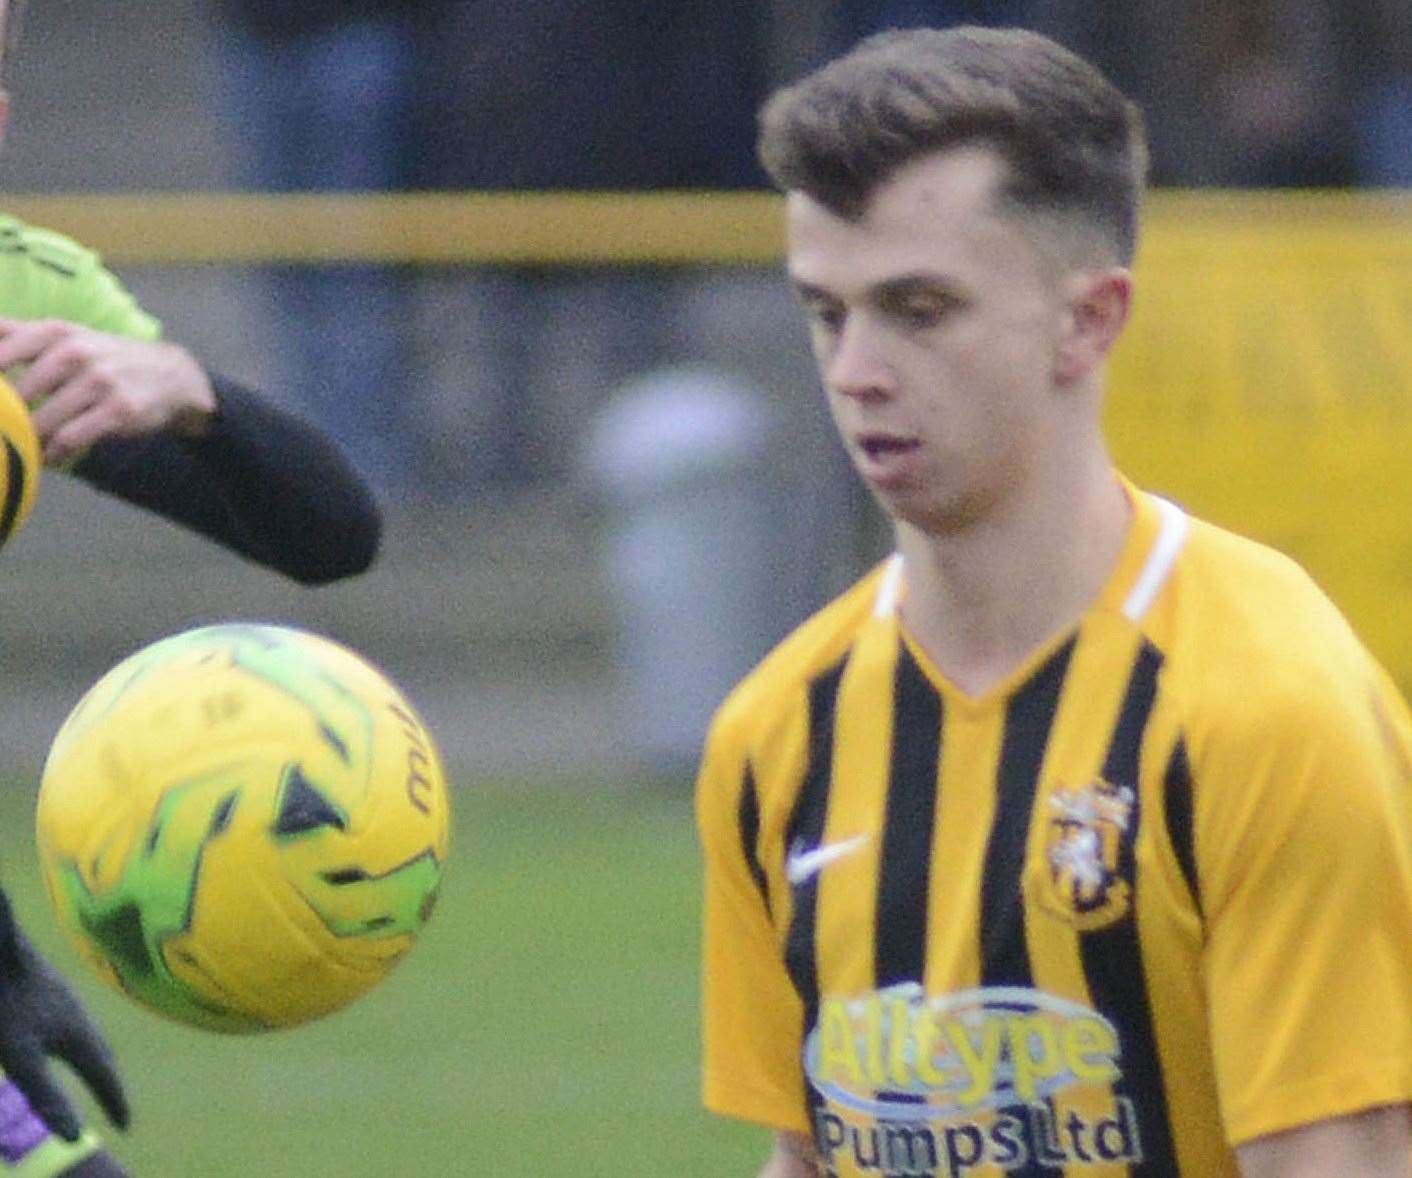 Johan Ter Horst netted for Folkestone Invicta in their win over Whitstable Town